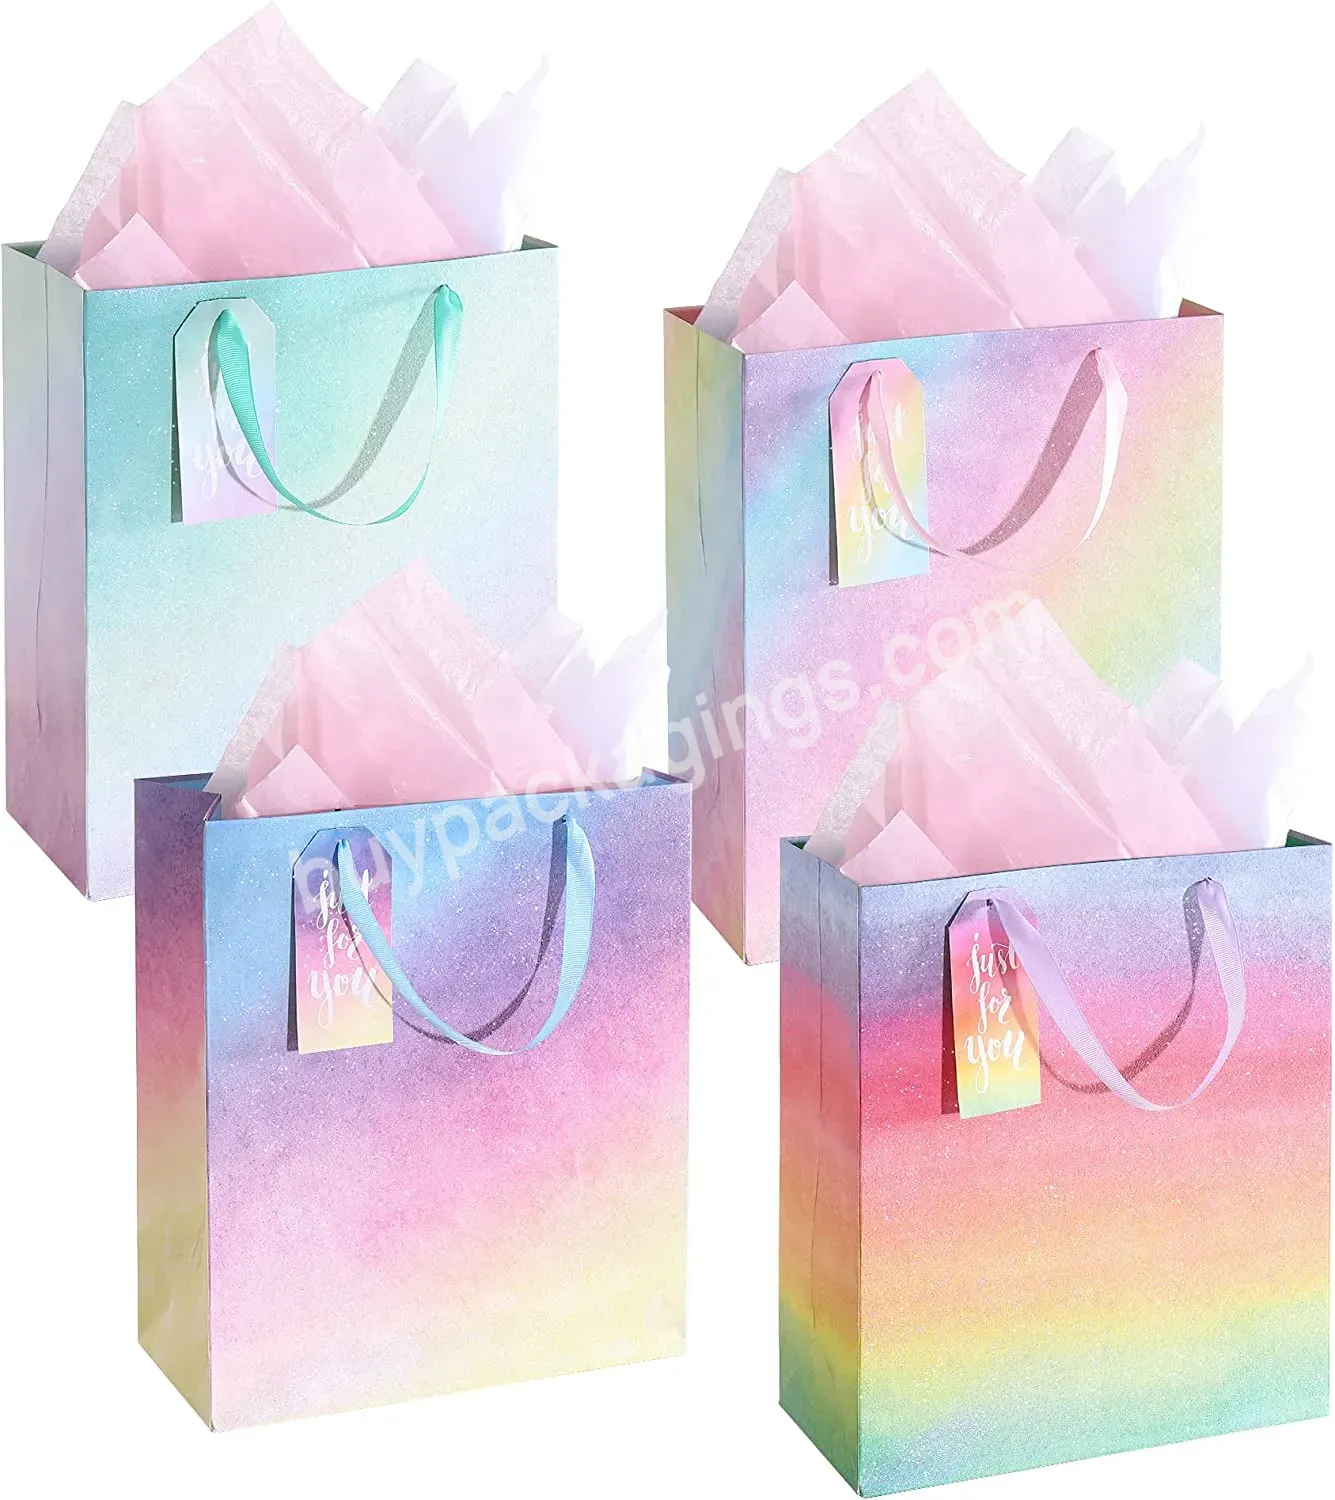 New Arrival Glitter Paper Bags With Handles Custom Colorful Paper Bag Large Gift Bags With Tissue Paper - Buy Large Gift Bags With Tissue Paper,Glitter Paper Bags With Handles,Custom Colorful Paper Bag.